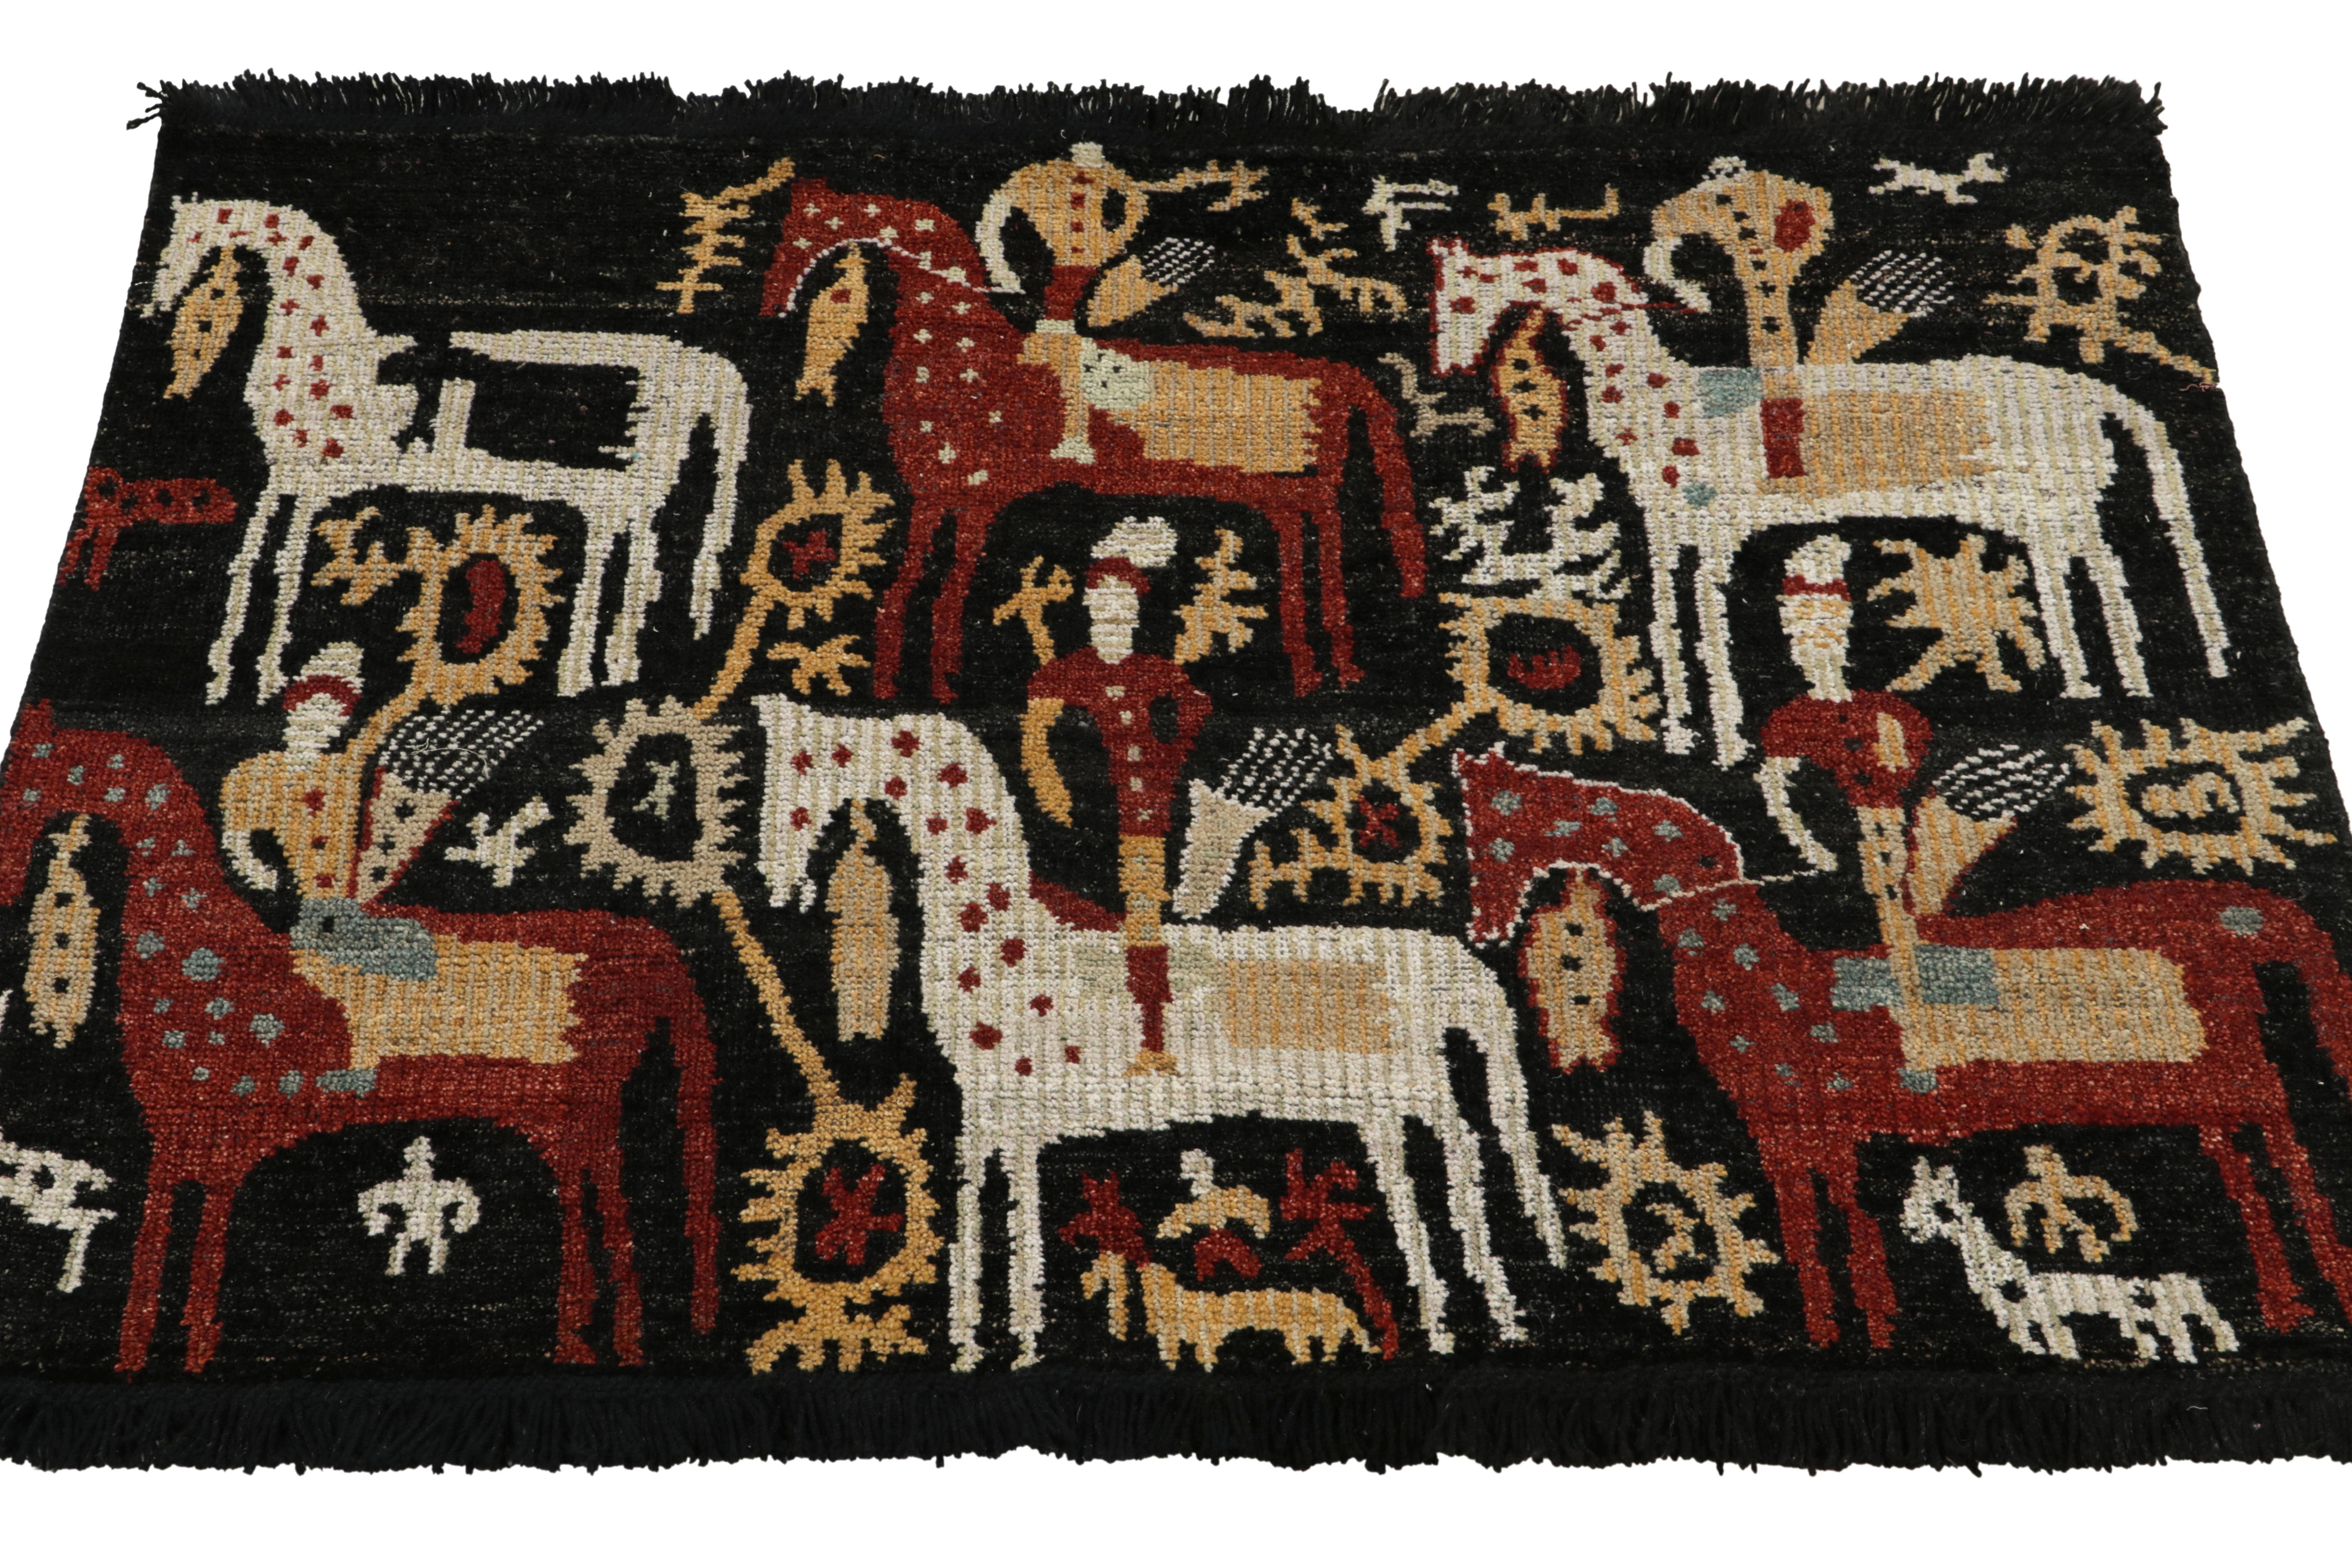 Connoting a refined modern take on tribal sensibilities, this 3x4 rug from the Burano Collection by Rug & Kilim reimagines a rare pictorial pattern of horsemen & animals. The nomadic rider theme boasts a daring colorway of white, brick red & gold